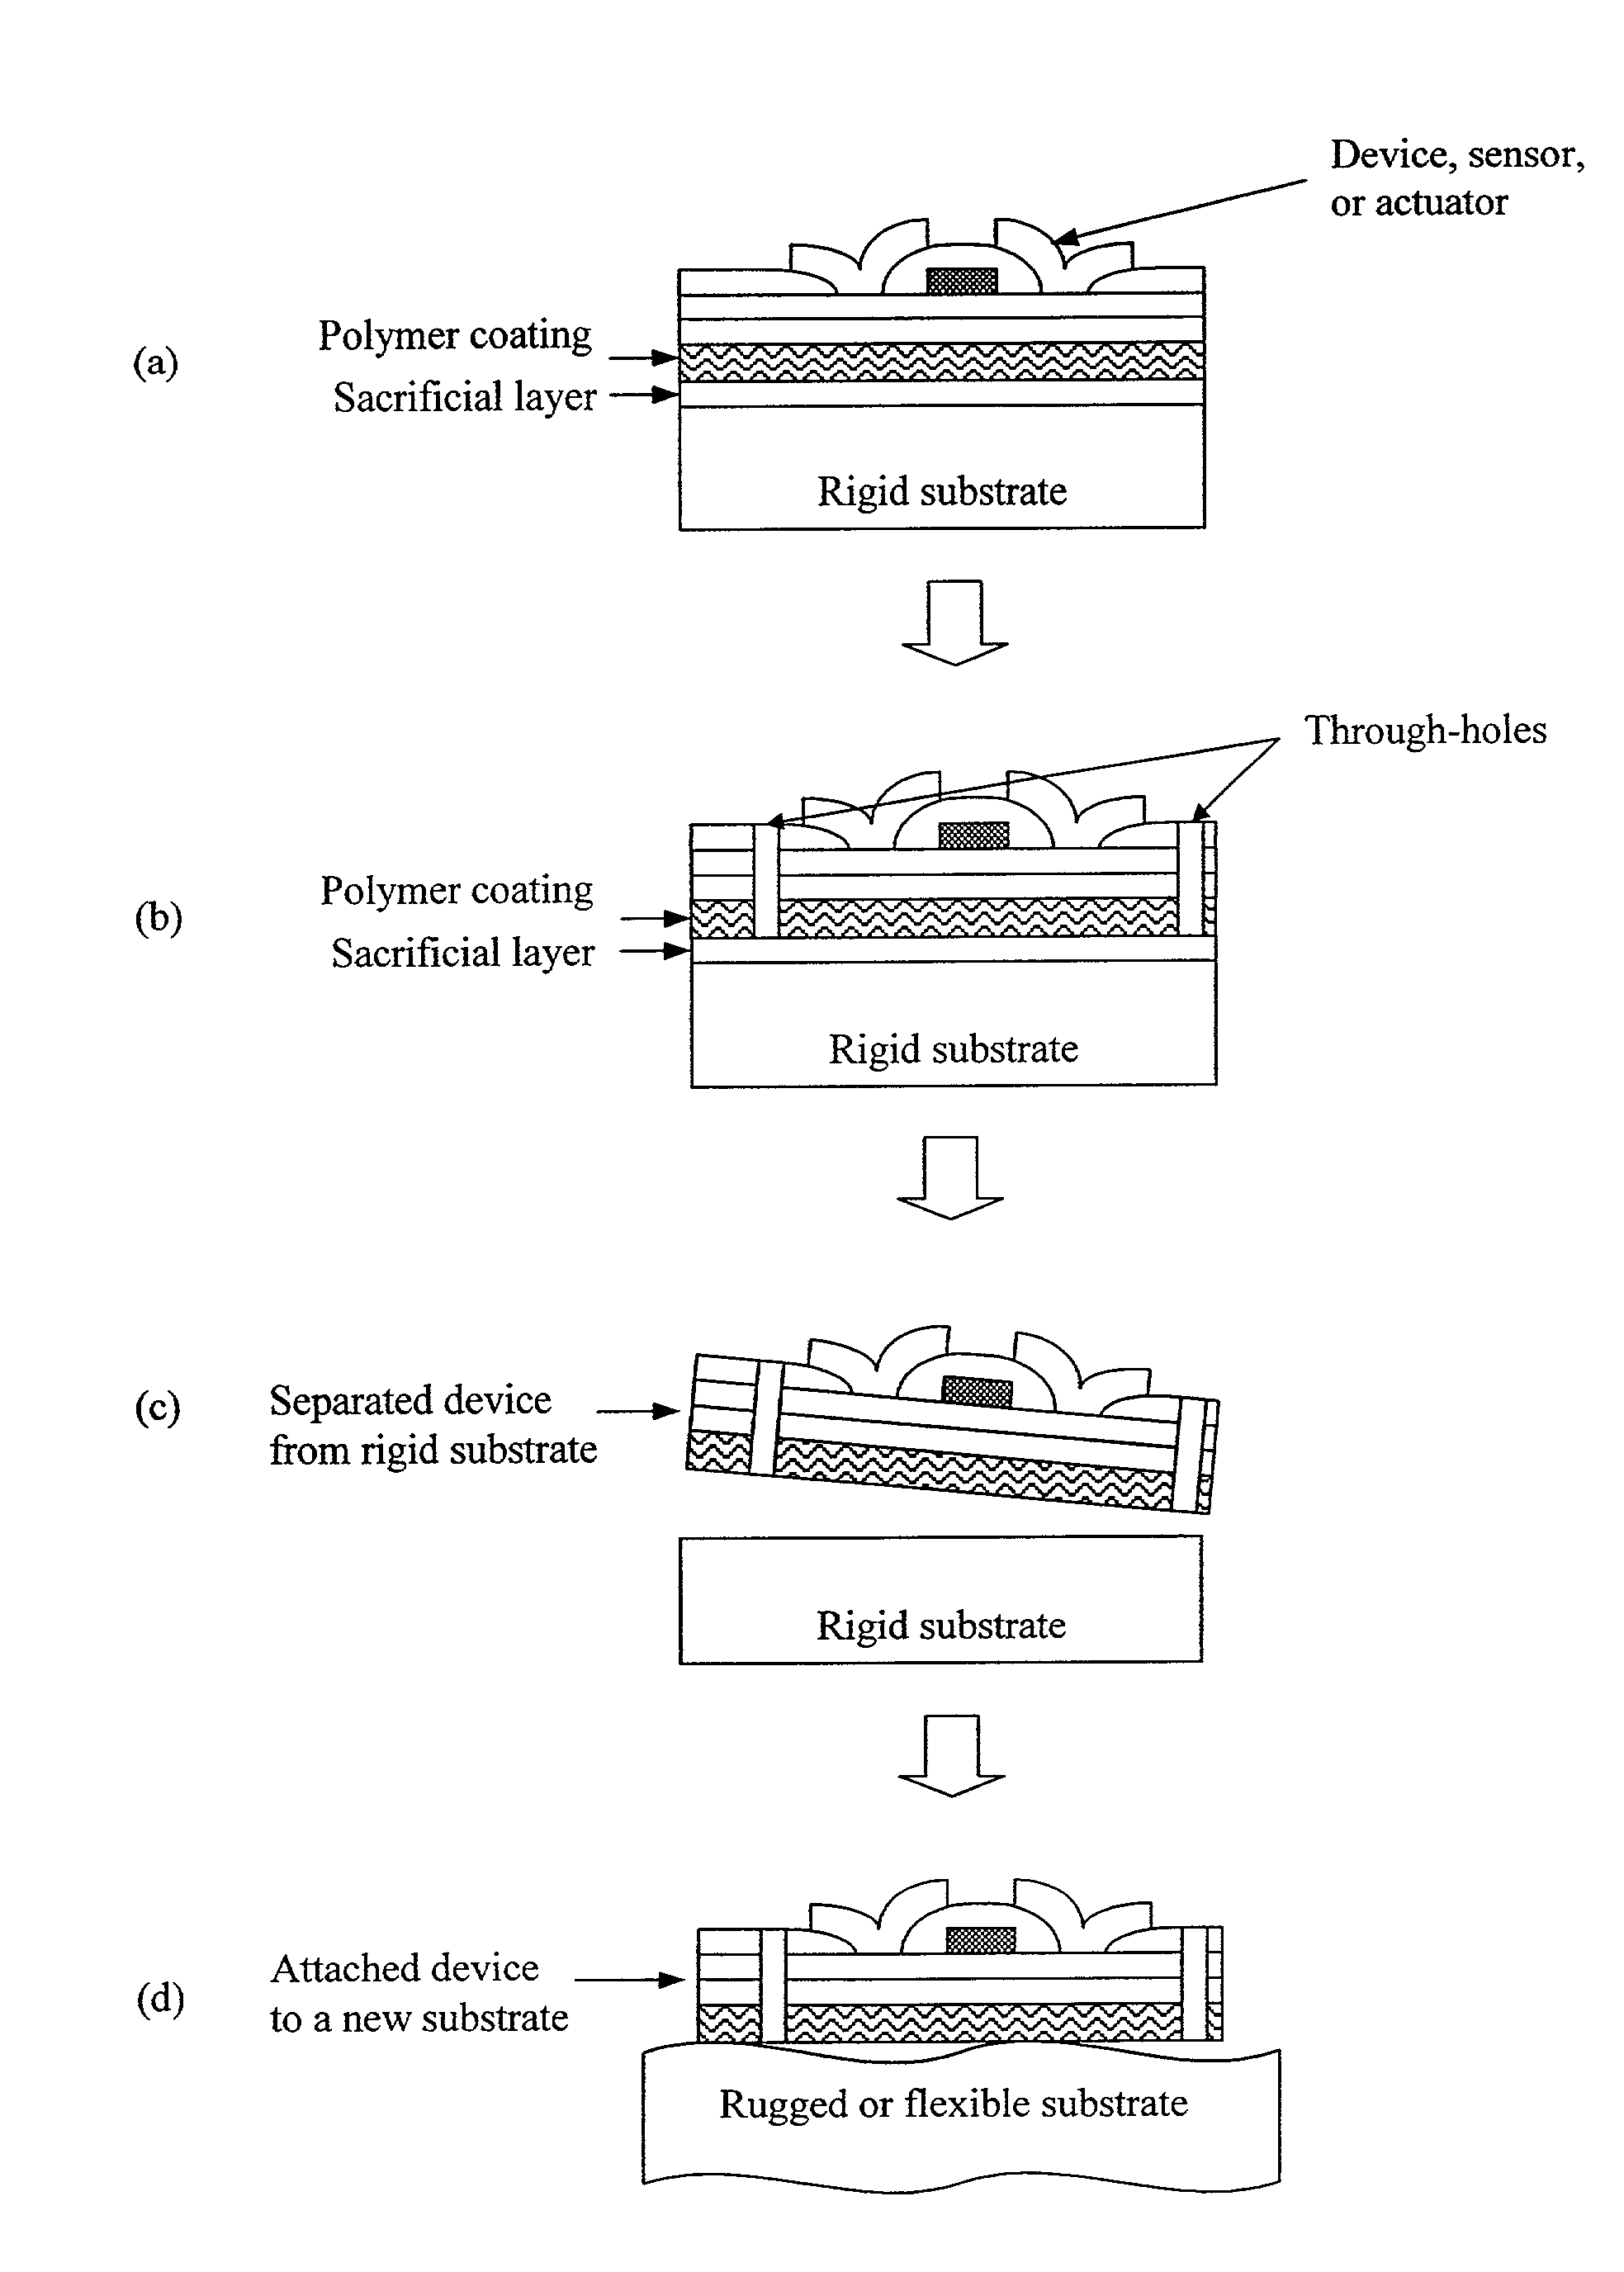 Deposited thin films and their use in separation and sacrificial layer applications